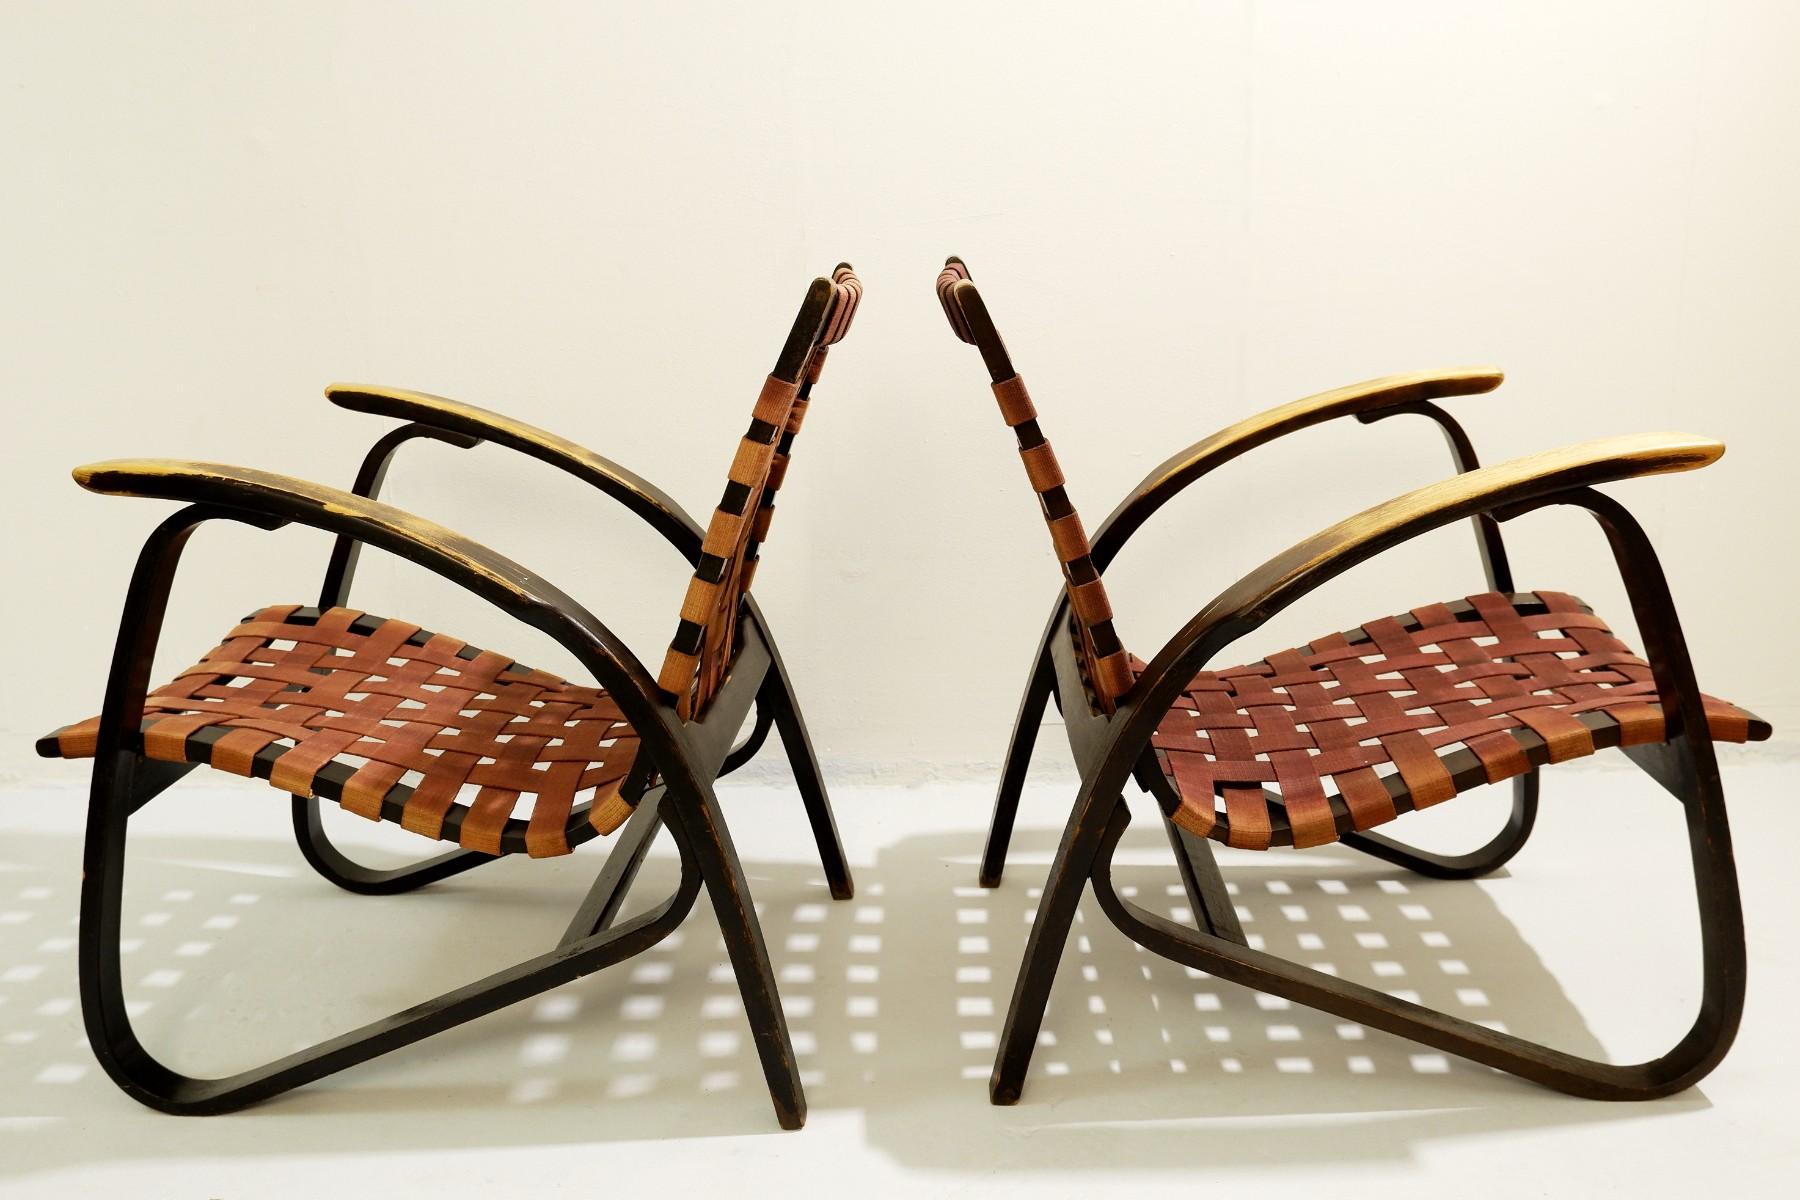 Pair of bentwood armchairs by Jan Vanek For UP Závody, 1930s.